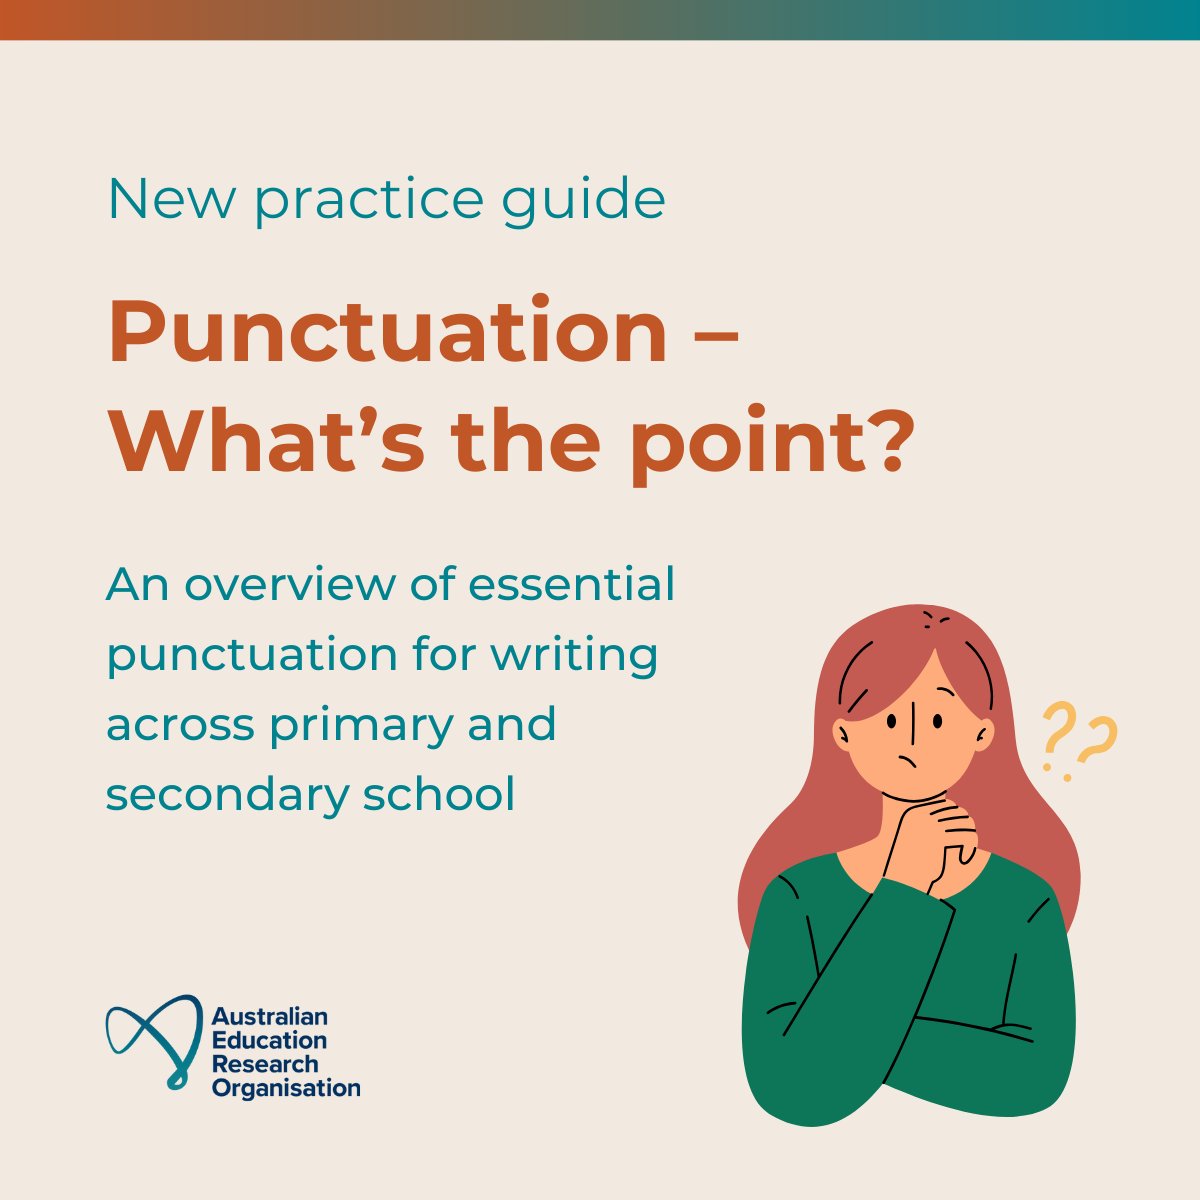 ✏️Our Punctuation guide complements AERO’s Writing practice guides, offering a comprehensive overview. 📝💡 Enhance clarity, intonation and precision in students' writing. 🏫🚀 Explore the Punctuation guide for improved teaching! 🔗 edresearch.edu.au/resources/punc…